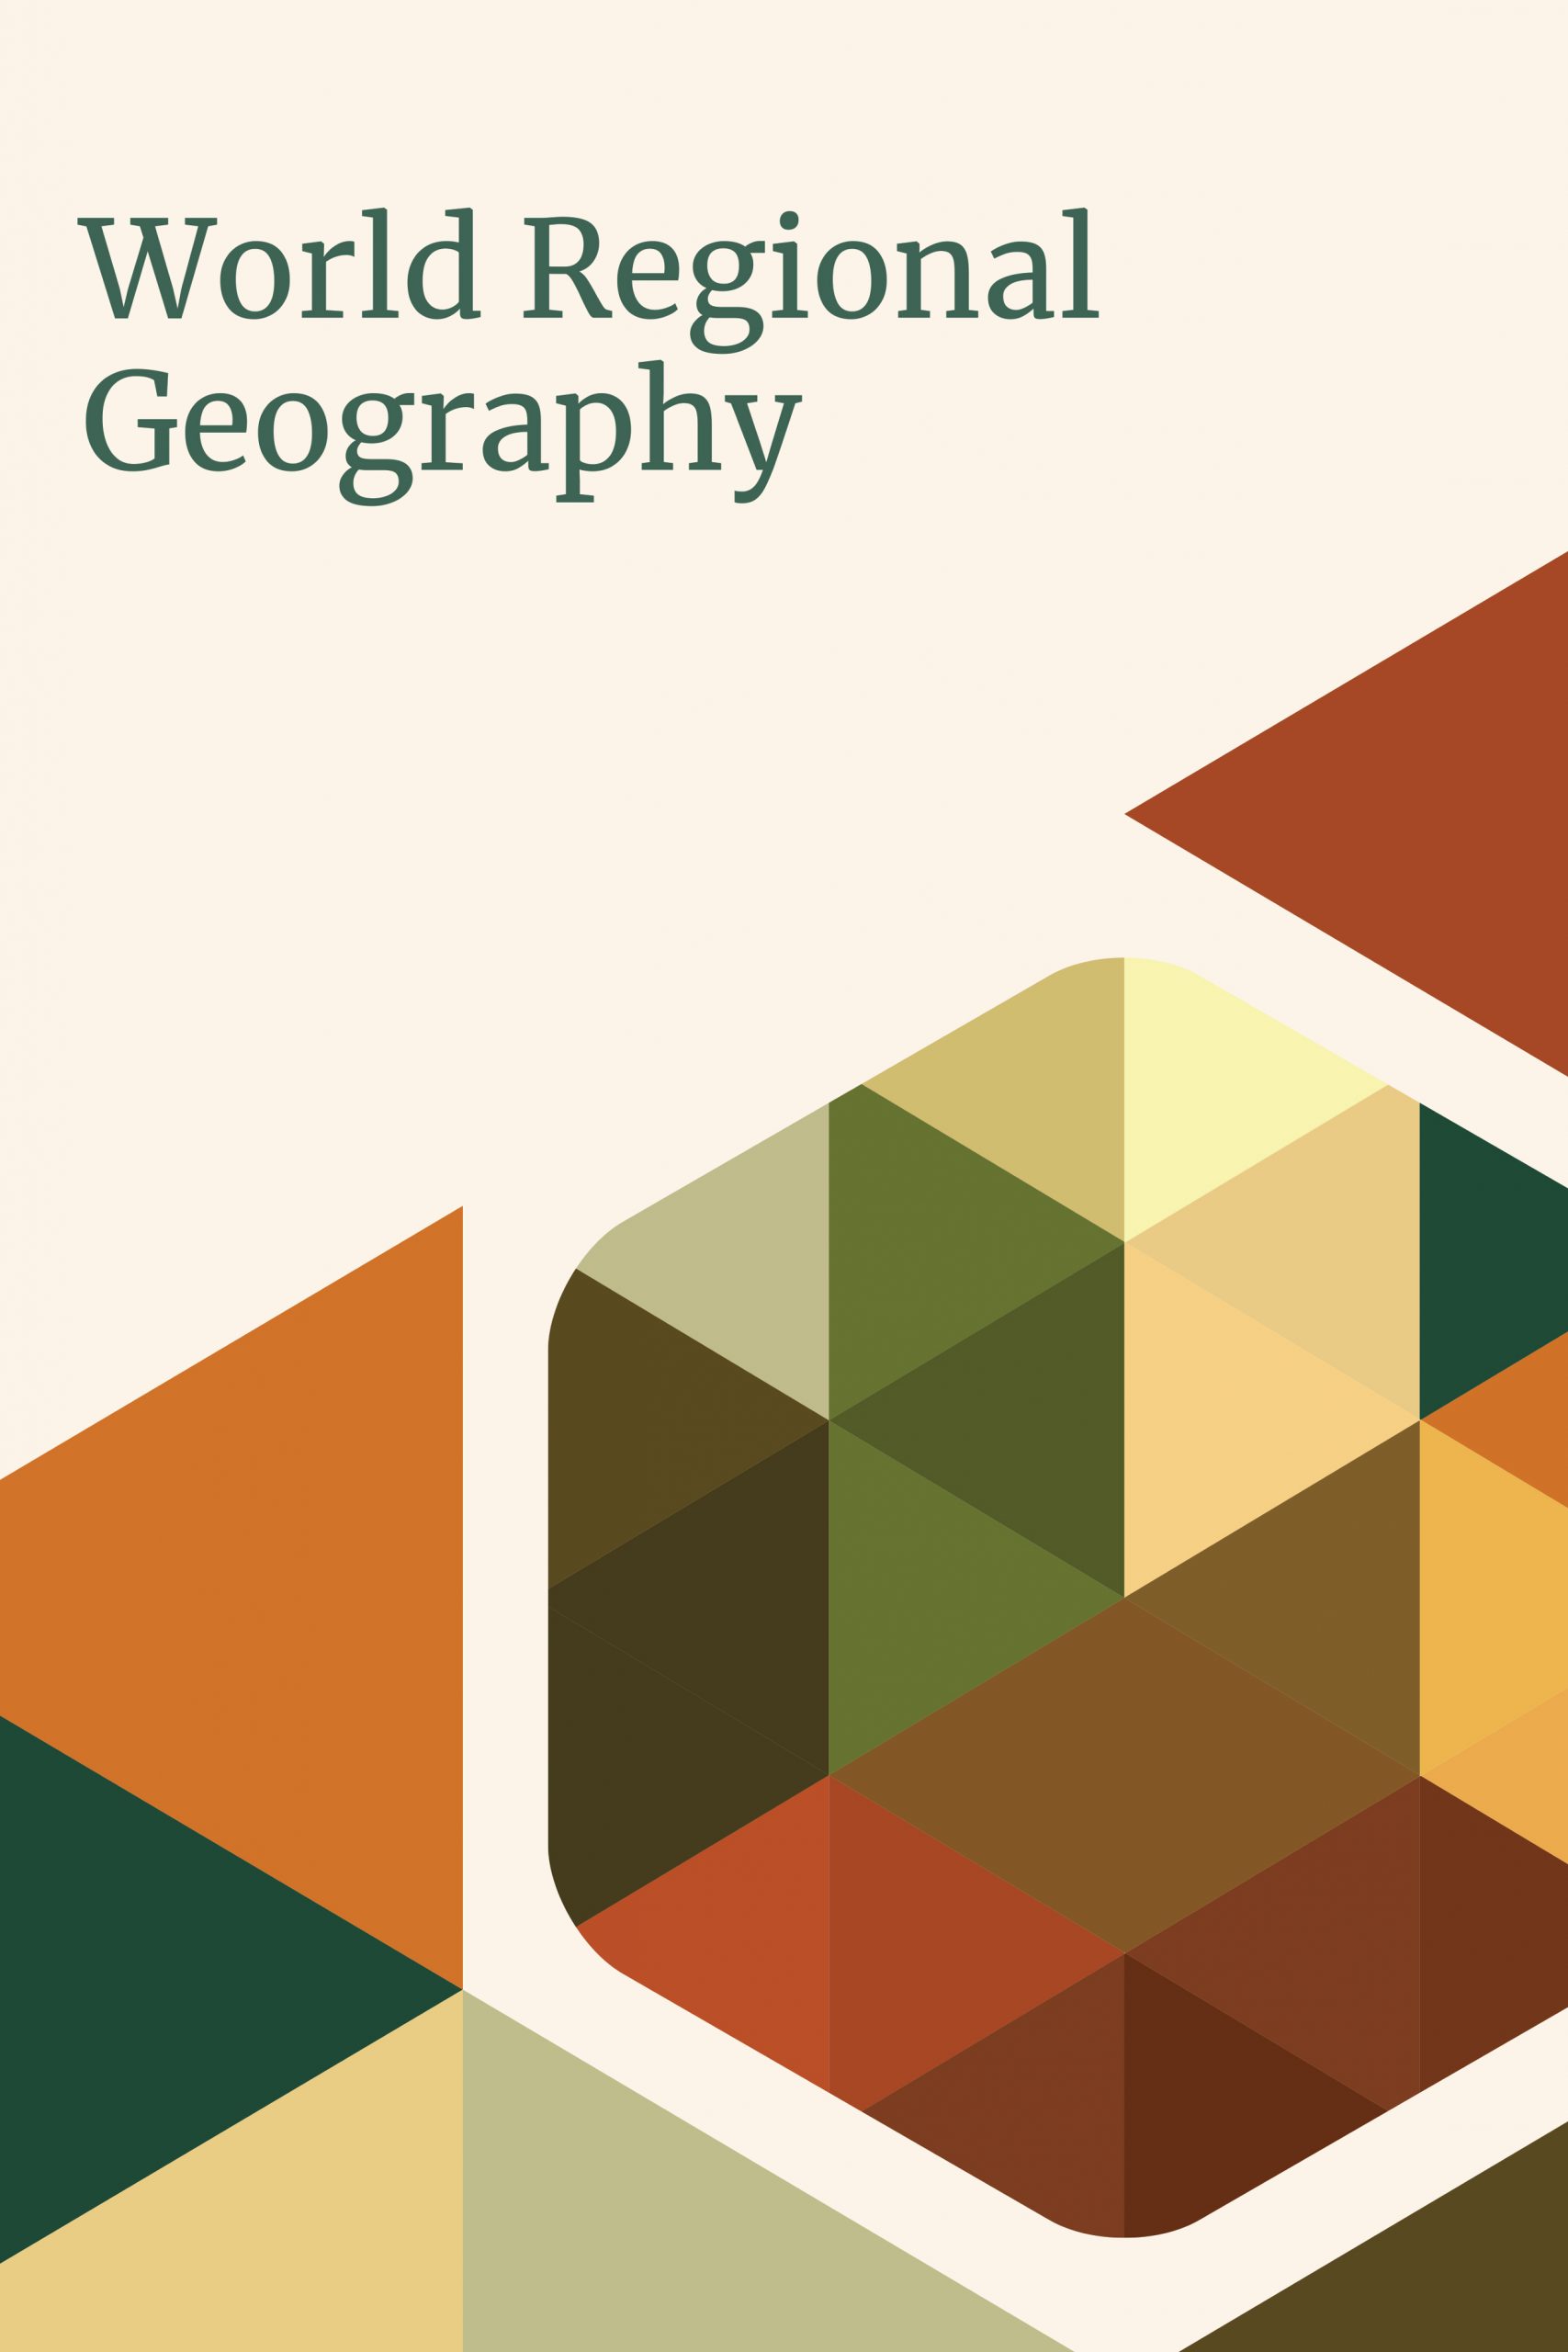 6.5 The Southern Core – Introduction to World Regional Geography